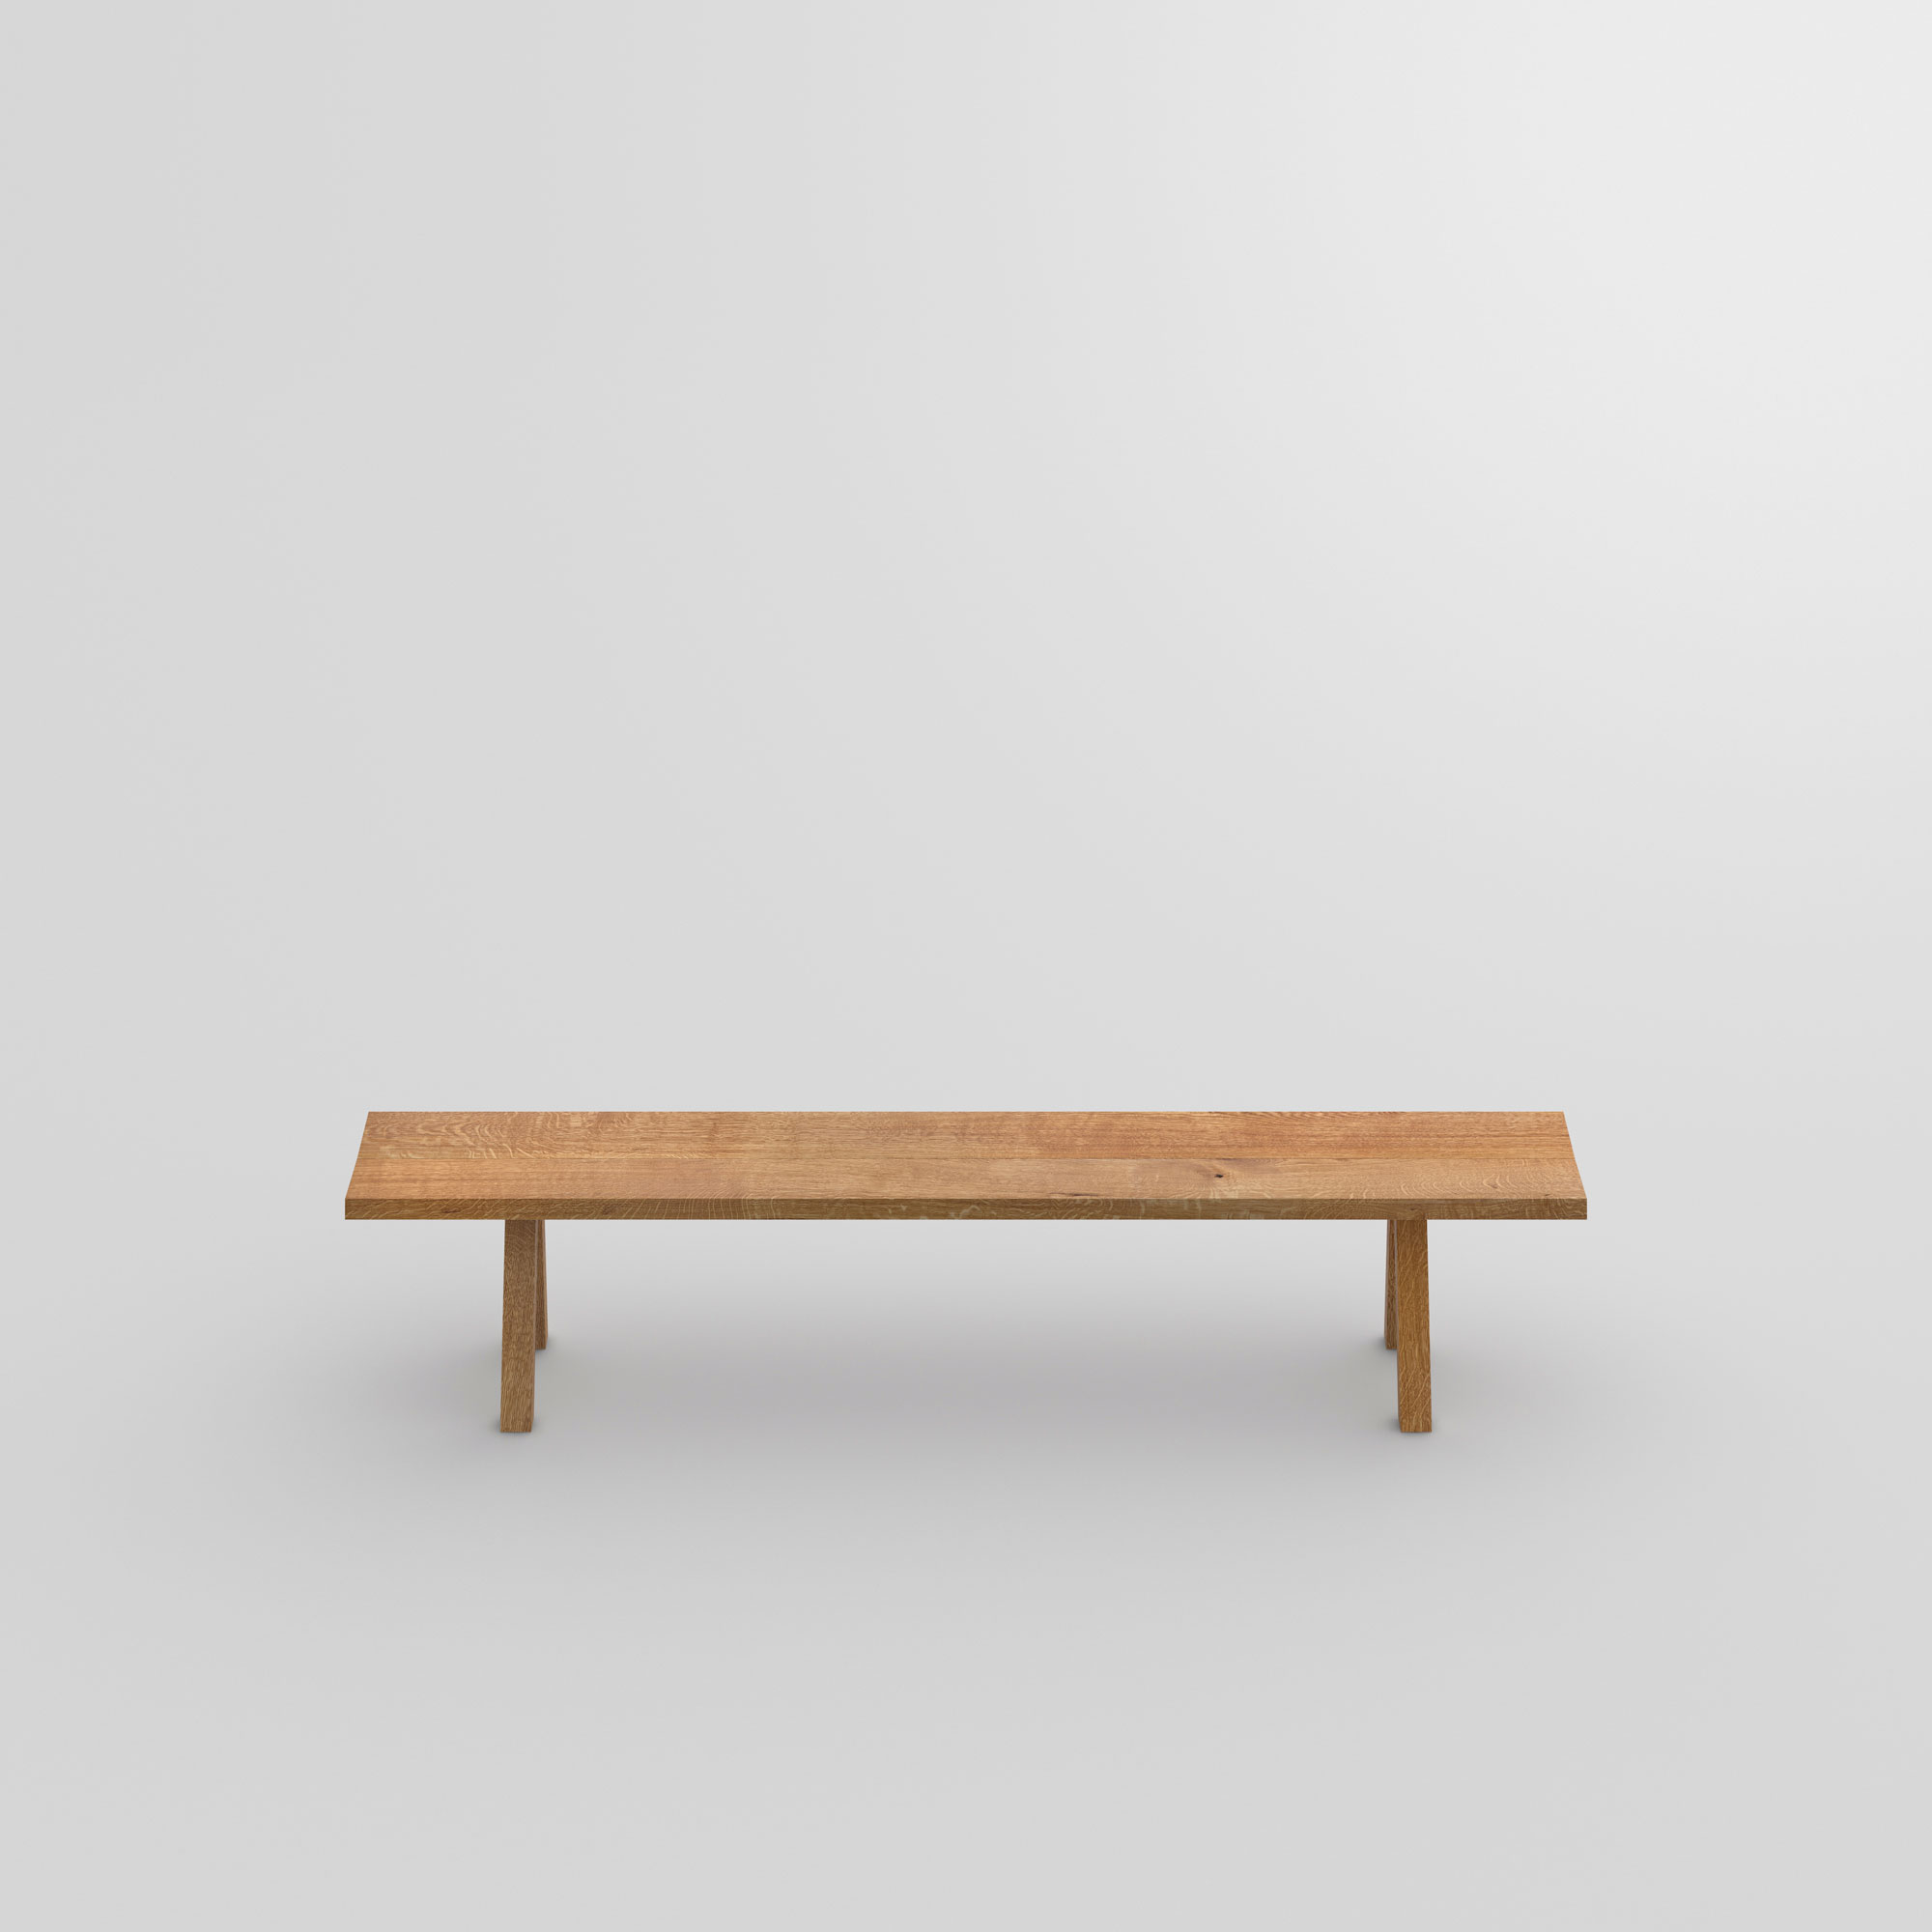 Wooden Designer Bench PAPILIO SIMPLE cam2 custom made in solid wood by vitamin design